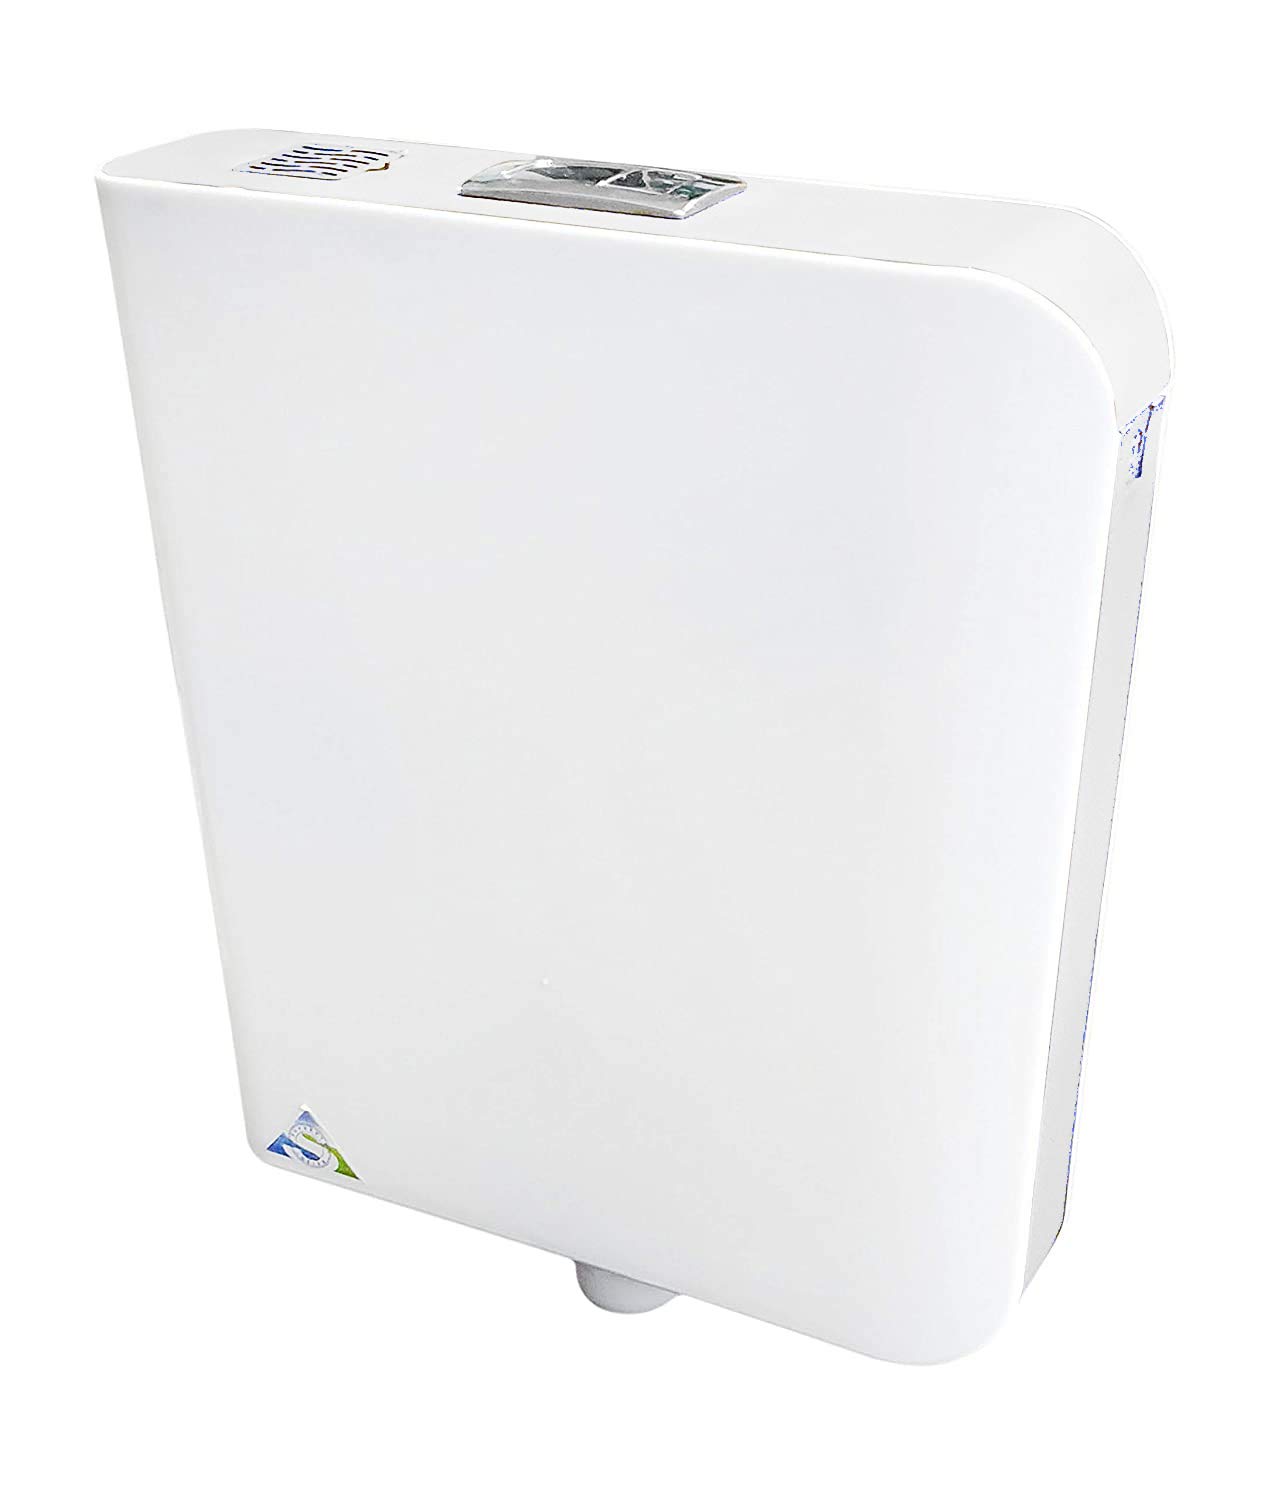 Aquieen Wall Mounted Double Flush Cistern with Provision for Air Freshner (White - Brown)